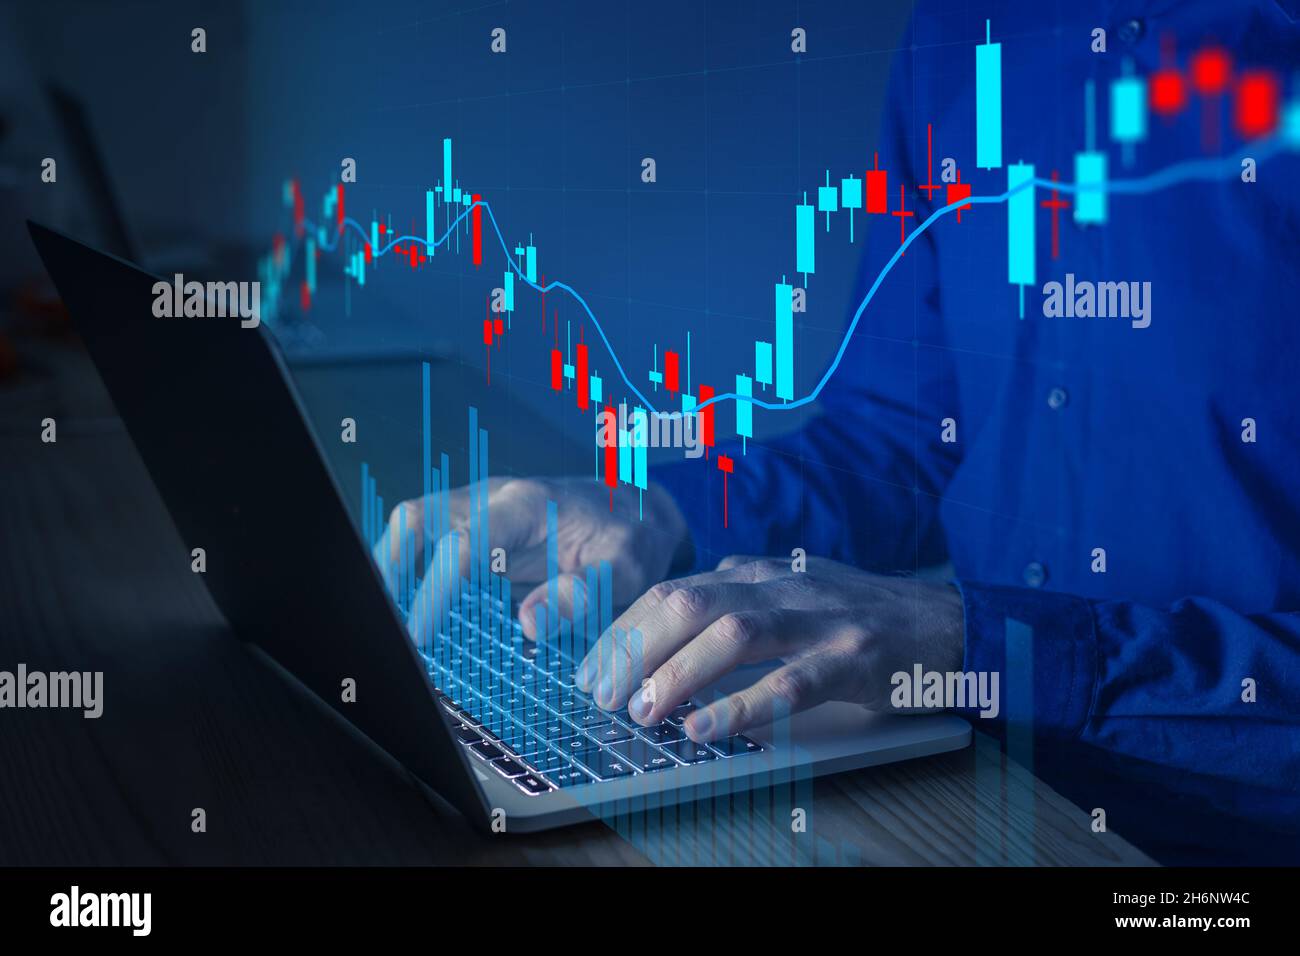 Financial chart with stock market or forex data plotted on candlestick graph. Finance and investment concept. Stock Photo